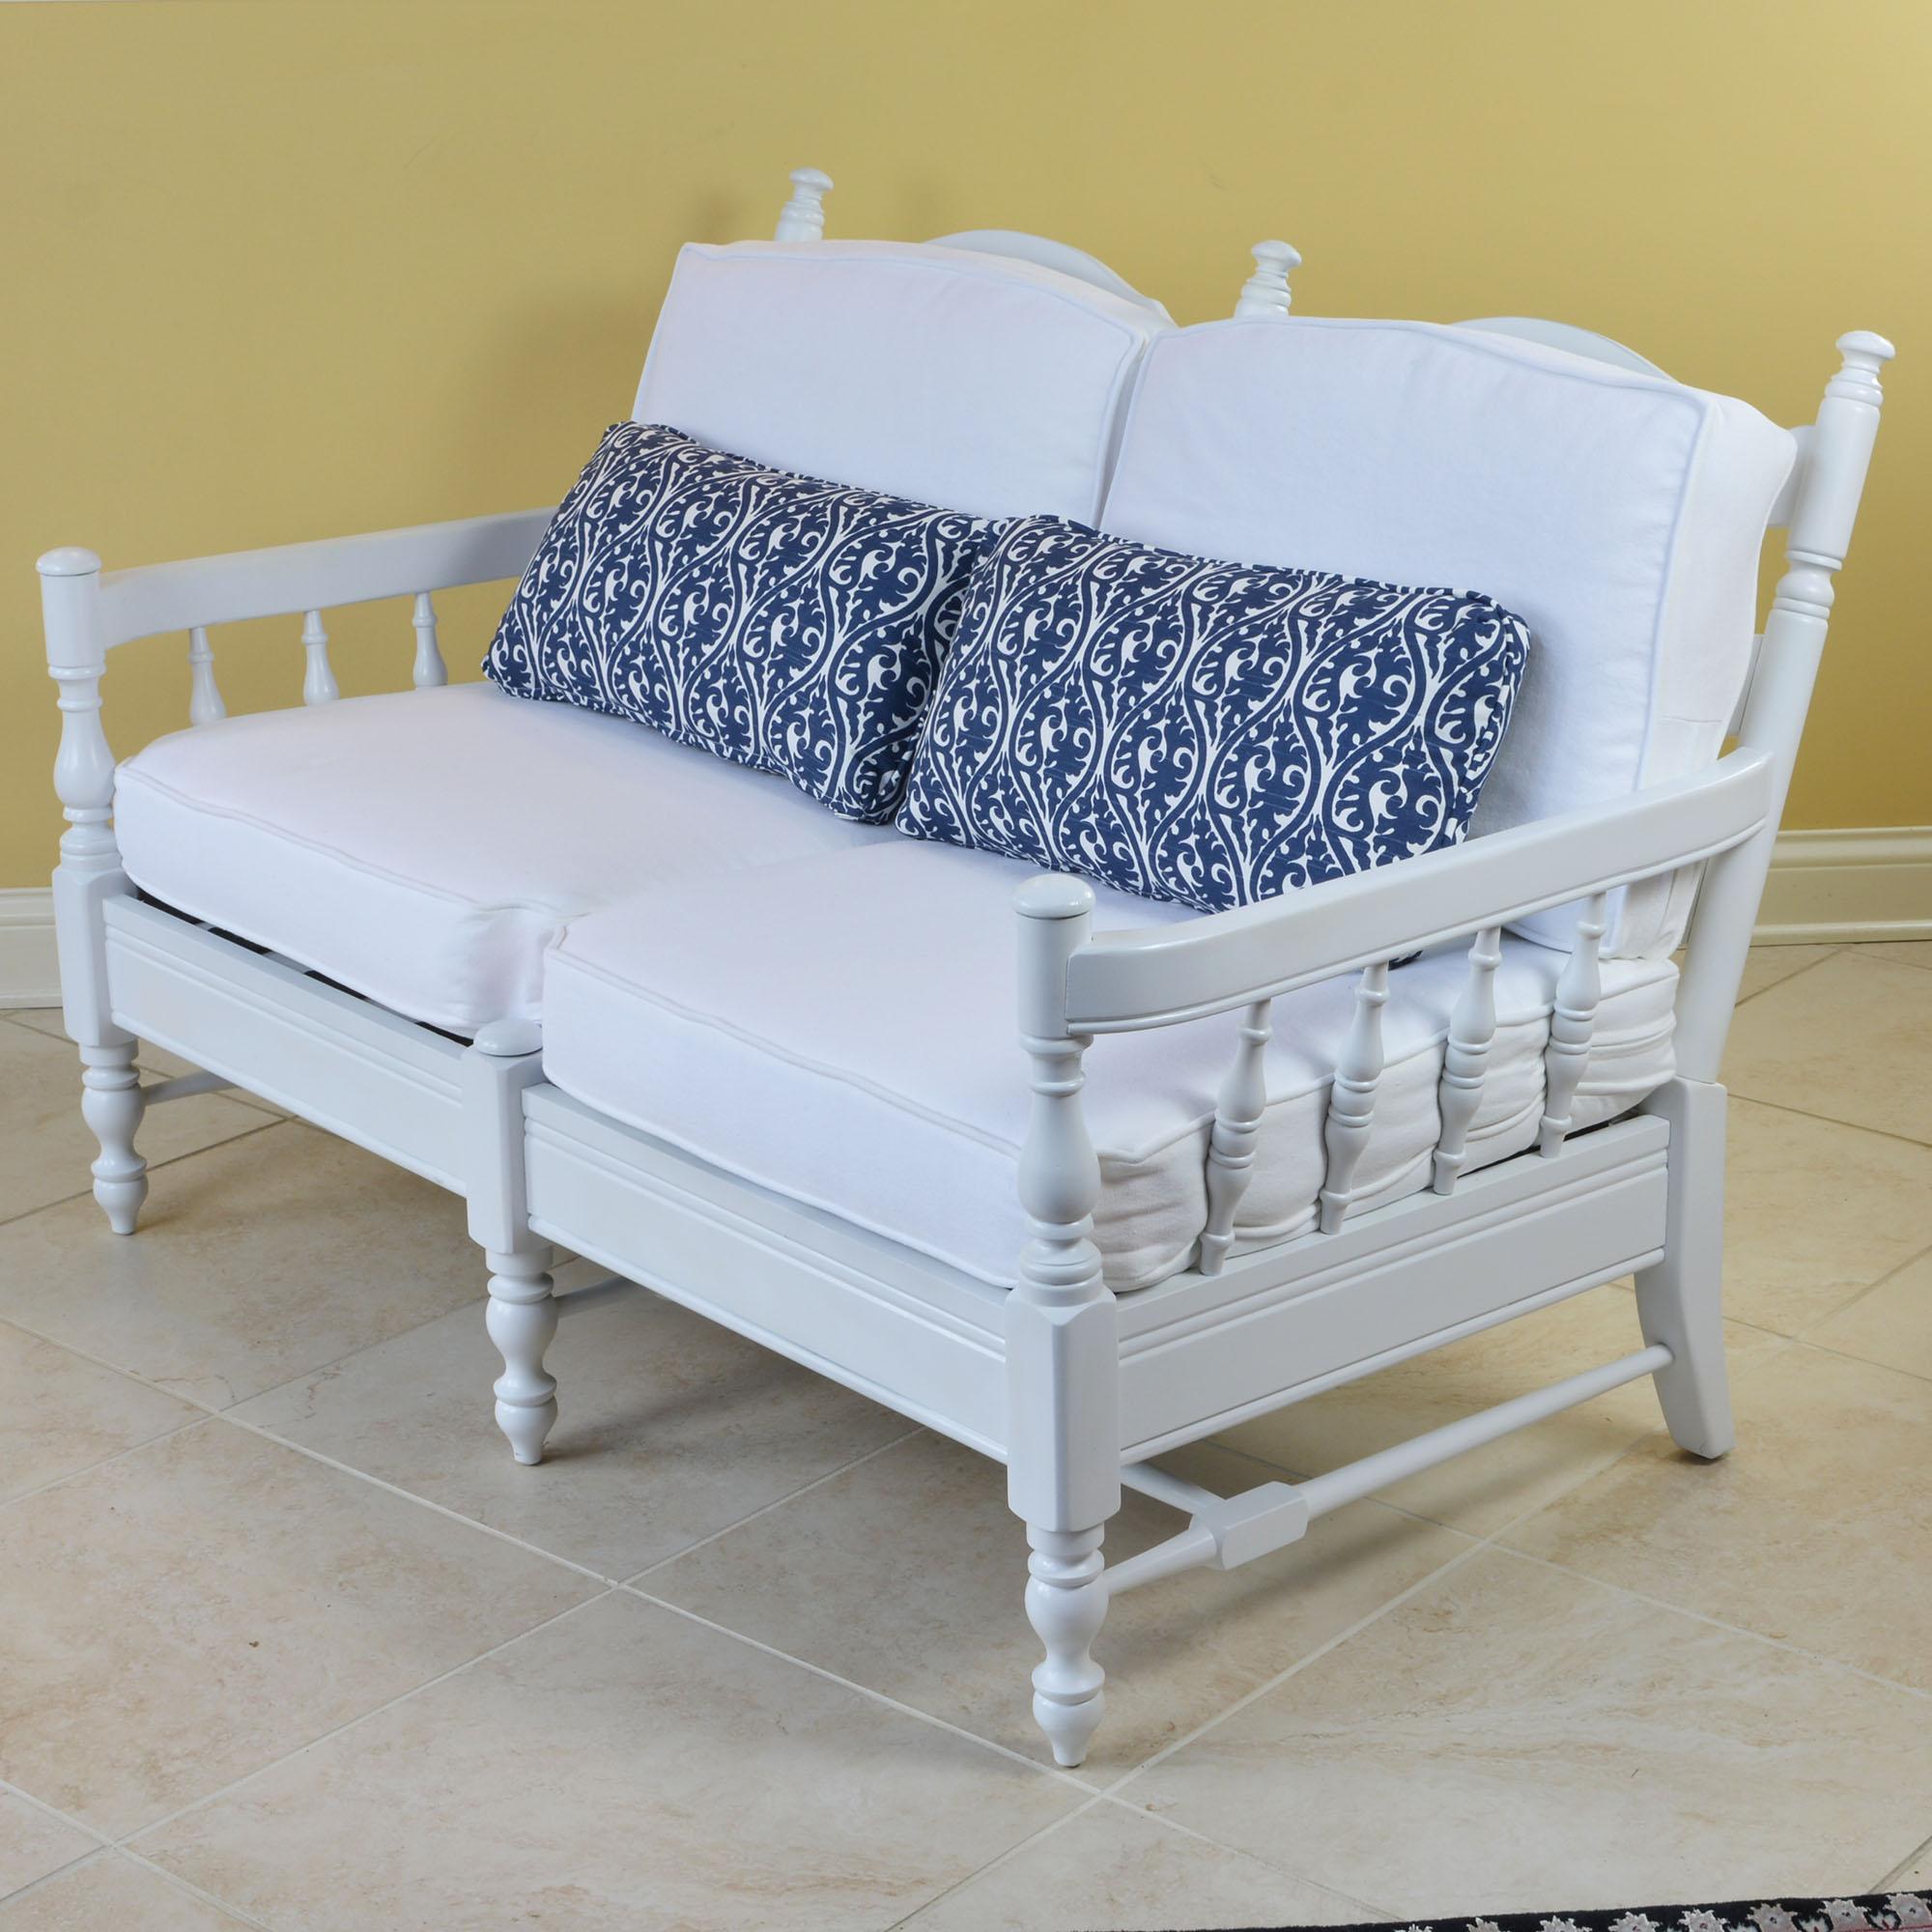 Newly updated French Provincial style settee is painted a fresh white with cushions covered in a heavy duty duck fabric in a clean white and two lumbar cushions in a coordinating navy/white print. This two person wood settee features triple ladder